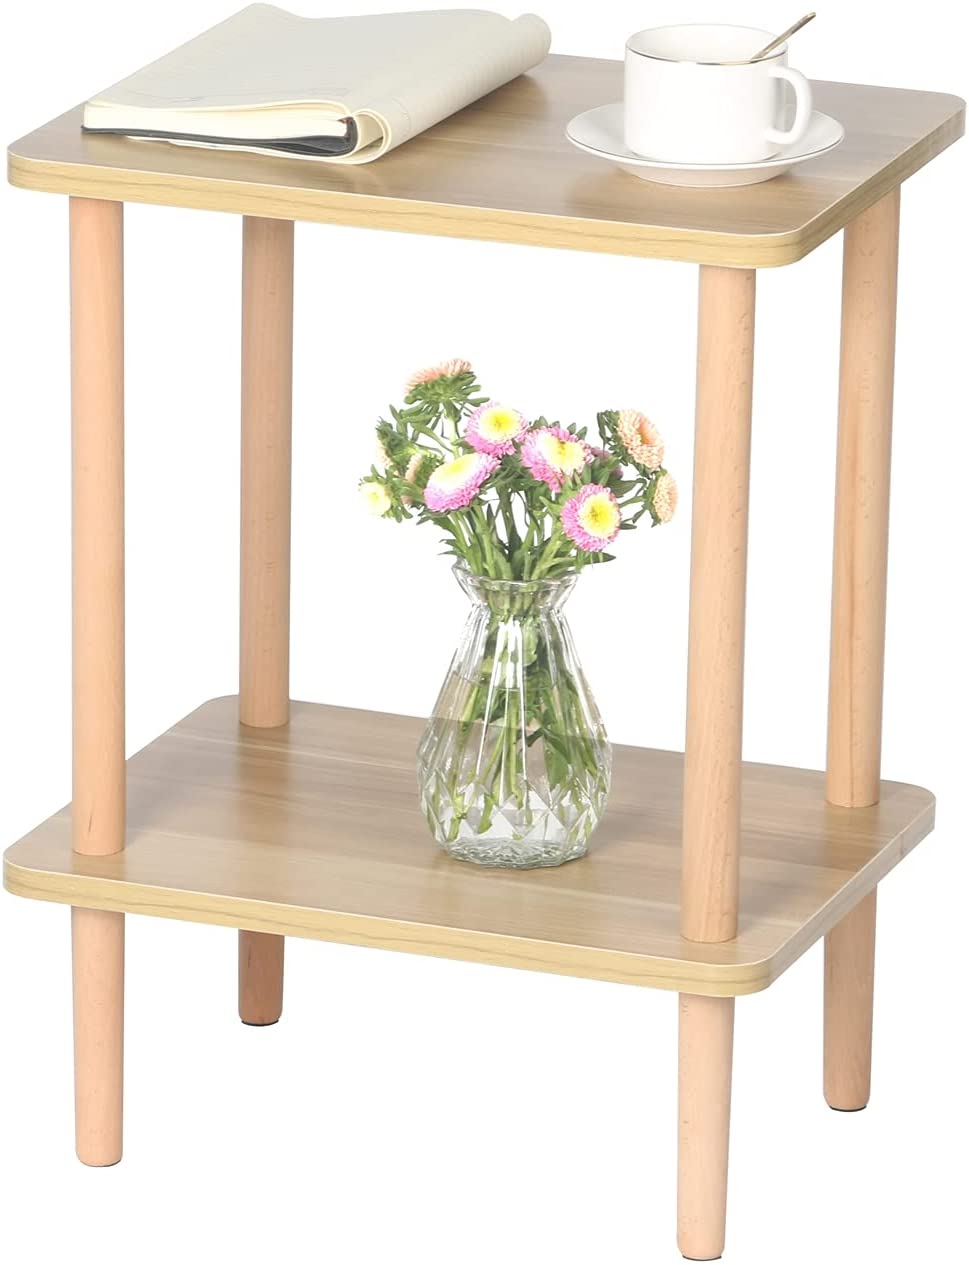 Side Tables : Tier Side Table Tall End Table with Storage Rack Wooden Nightstand Bedside Table